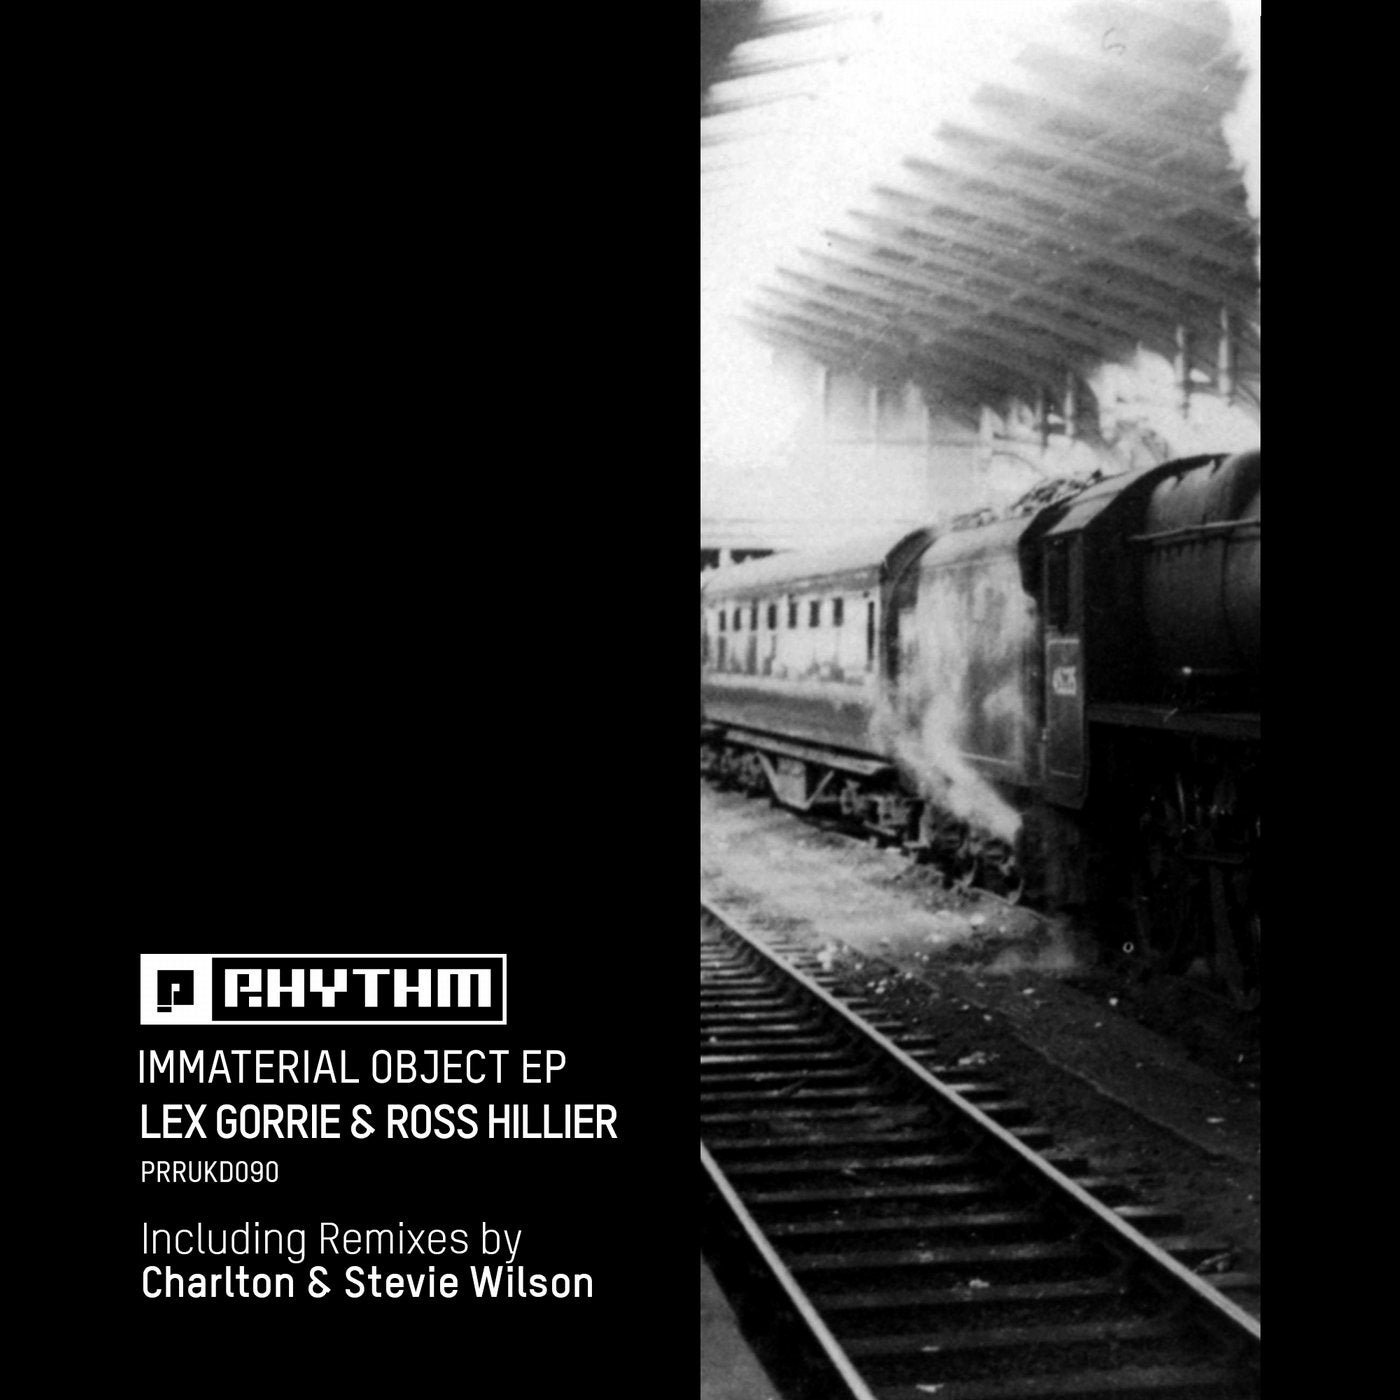 Immaterial Object EP